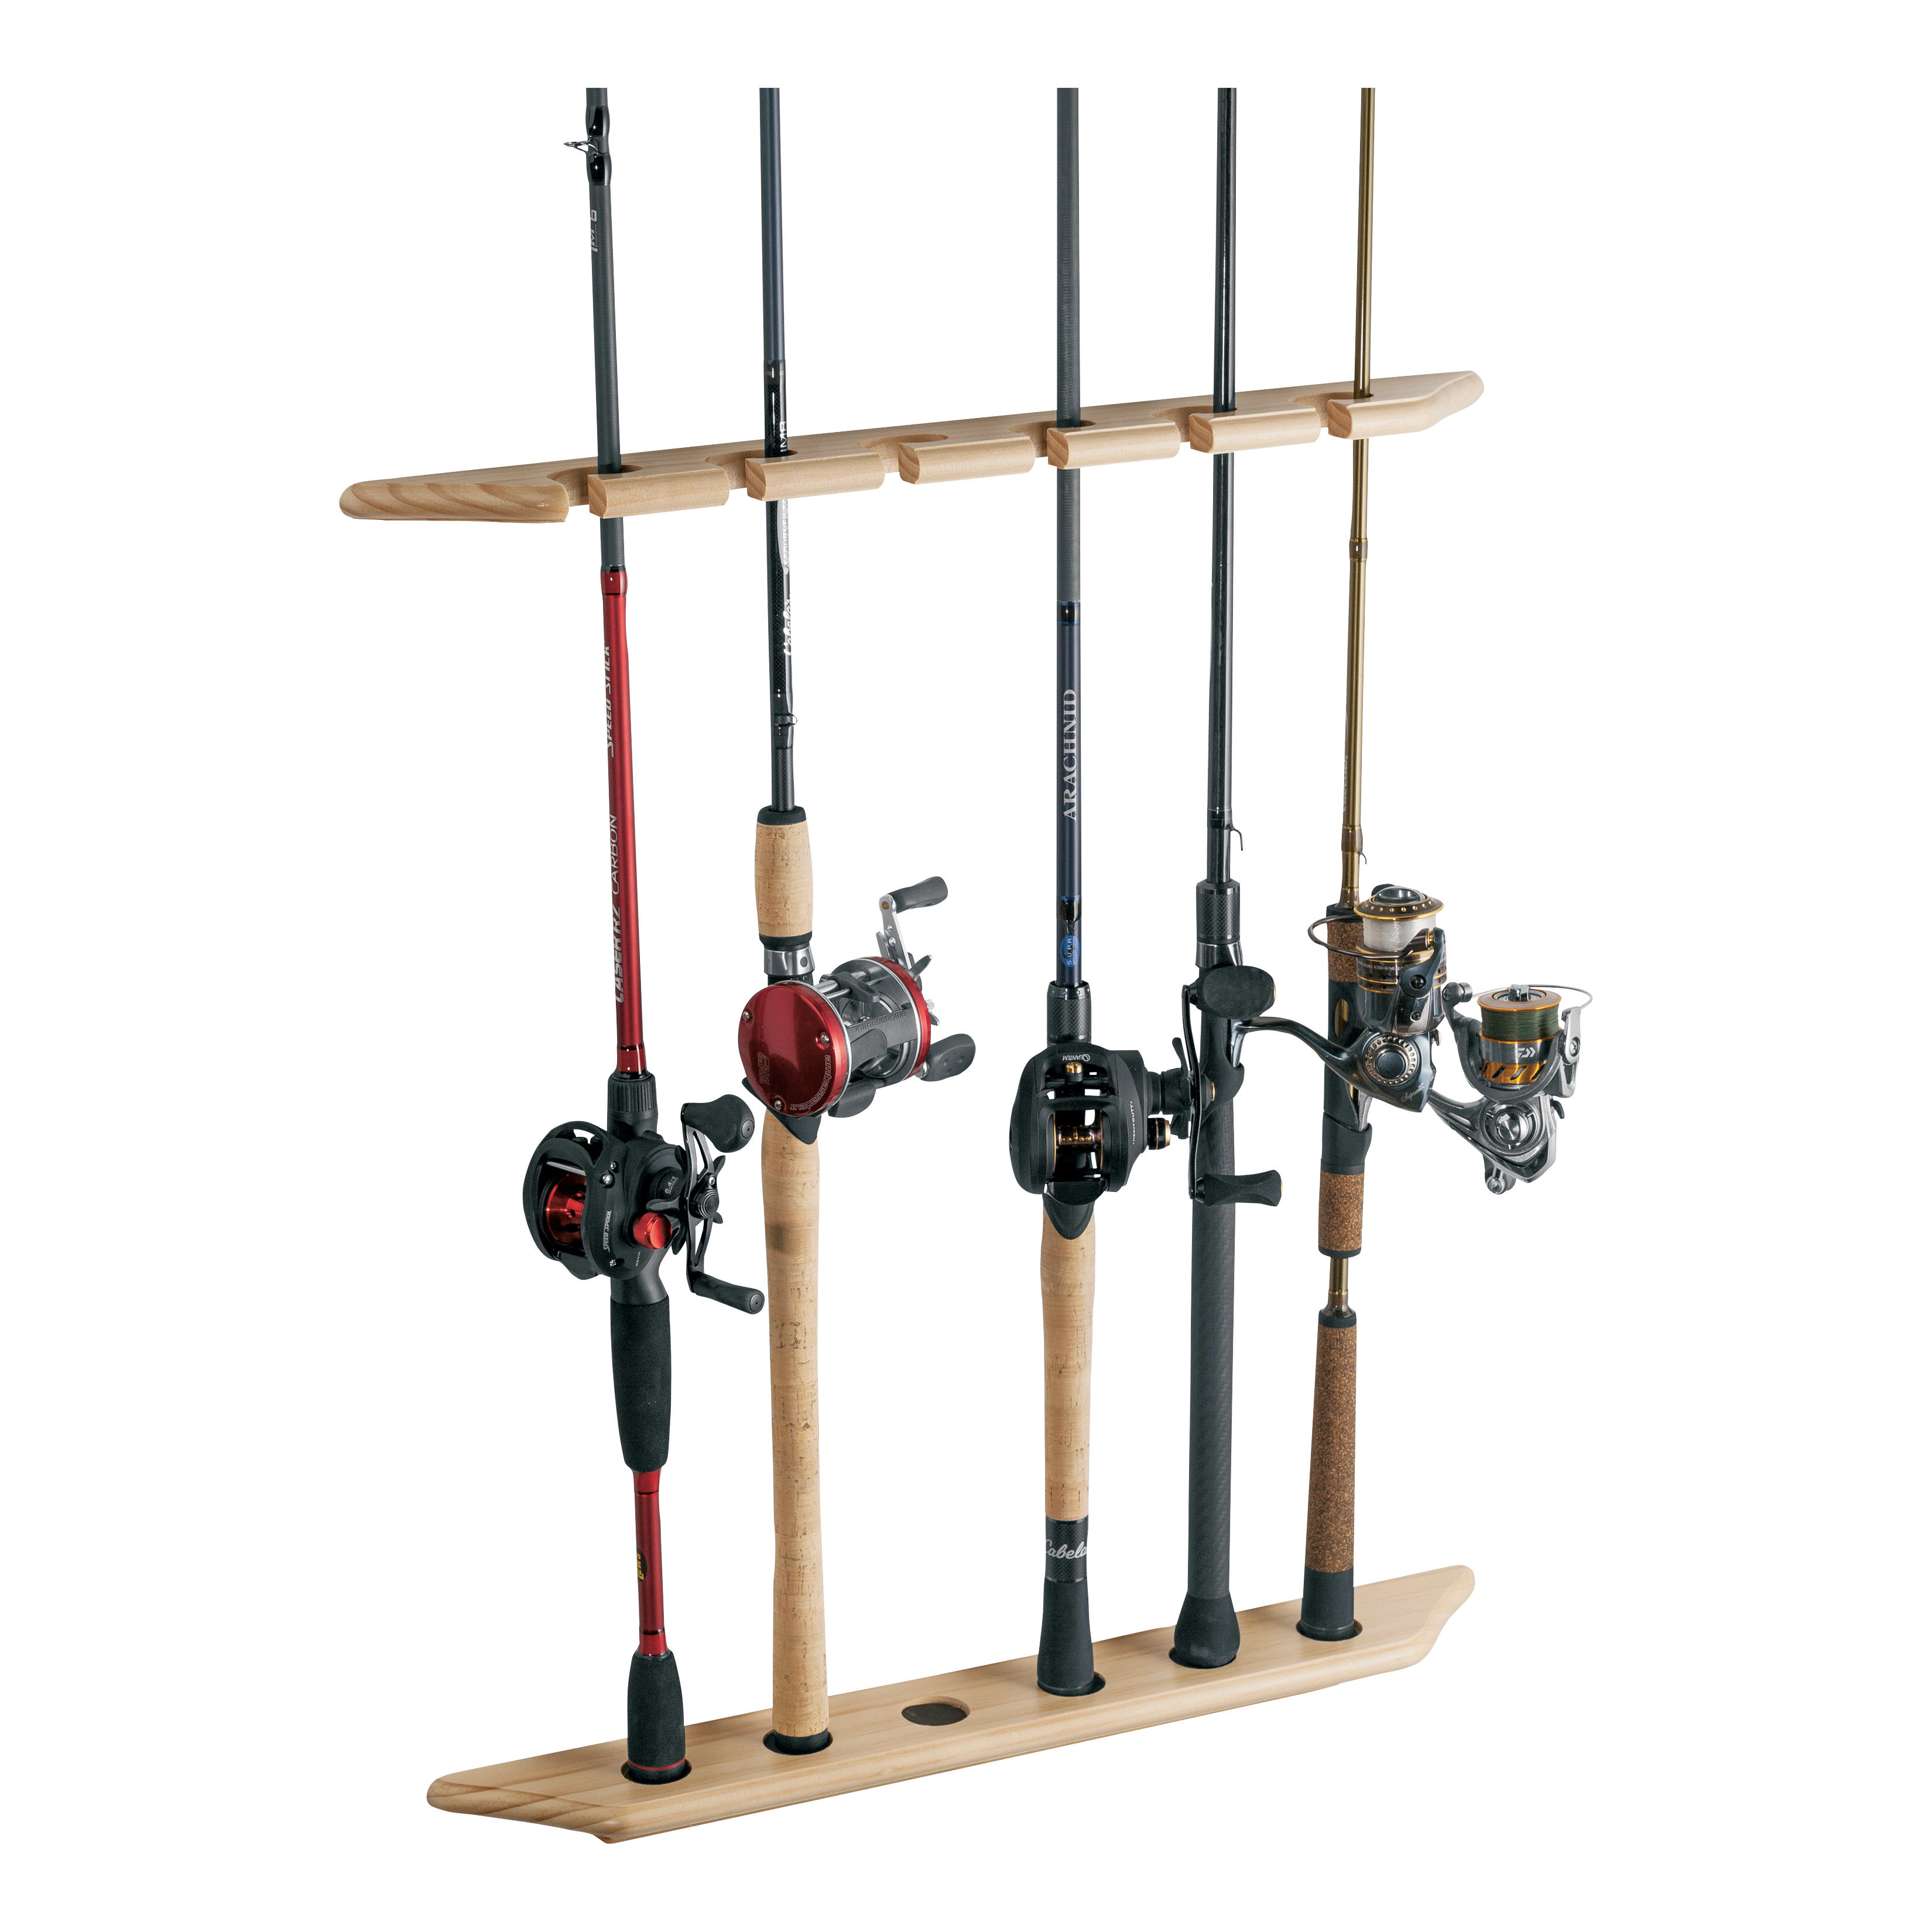 Beyond Fishing B10 Fishing Rod Holder - Wall Mounted Fishing Rod Rack,  Vertical or Horizontal, Store 10 Rods in 17 Inches, Great Fishing Pole  Holder 